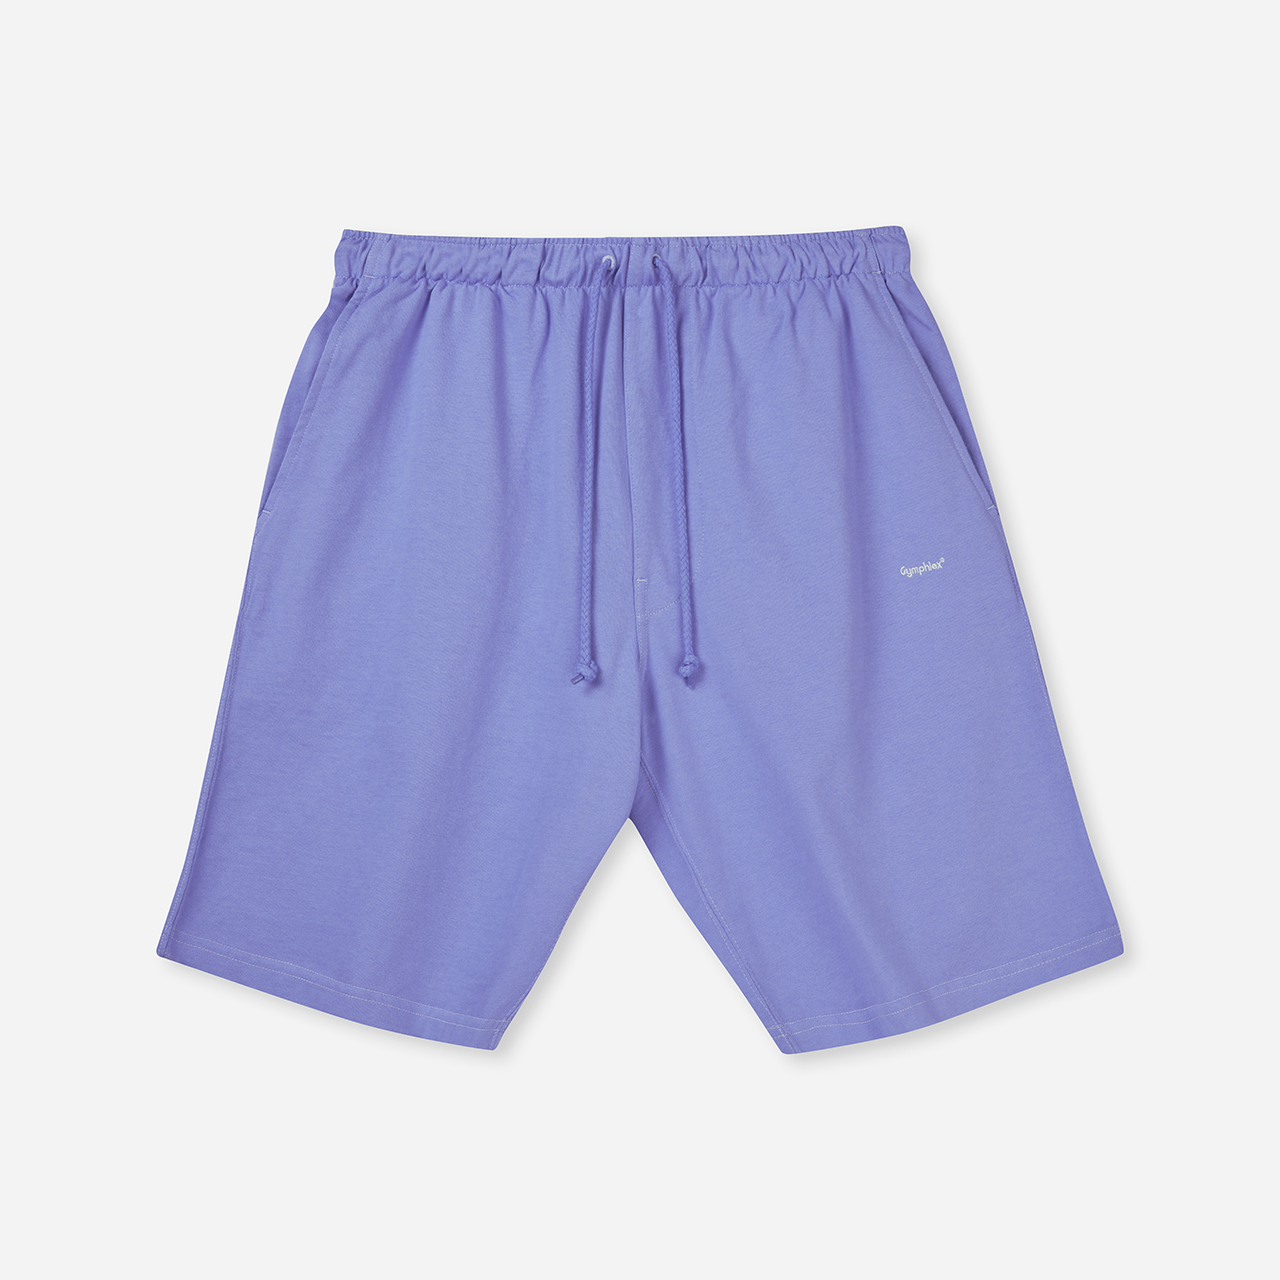 Waterloo Shorts - Sax • Gymphlex • Beautiful, practical clothing Made ...